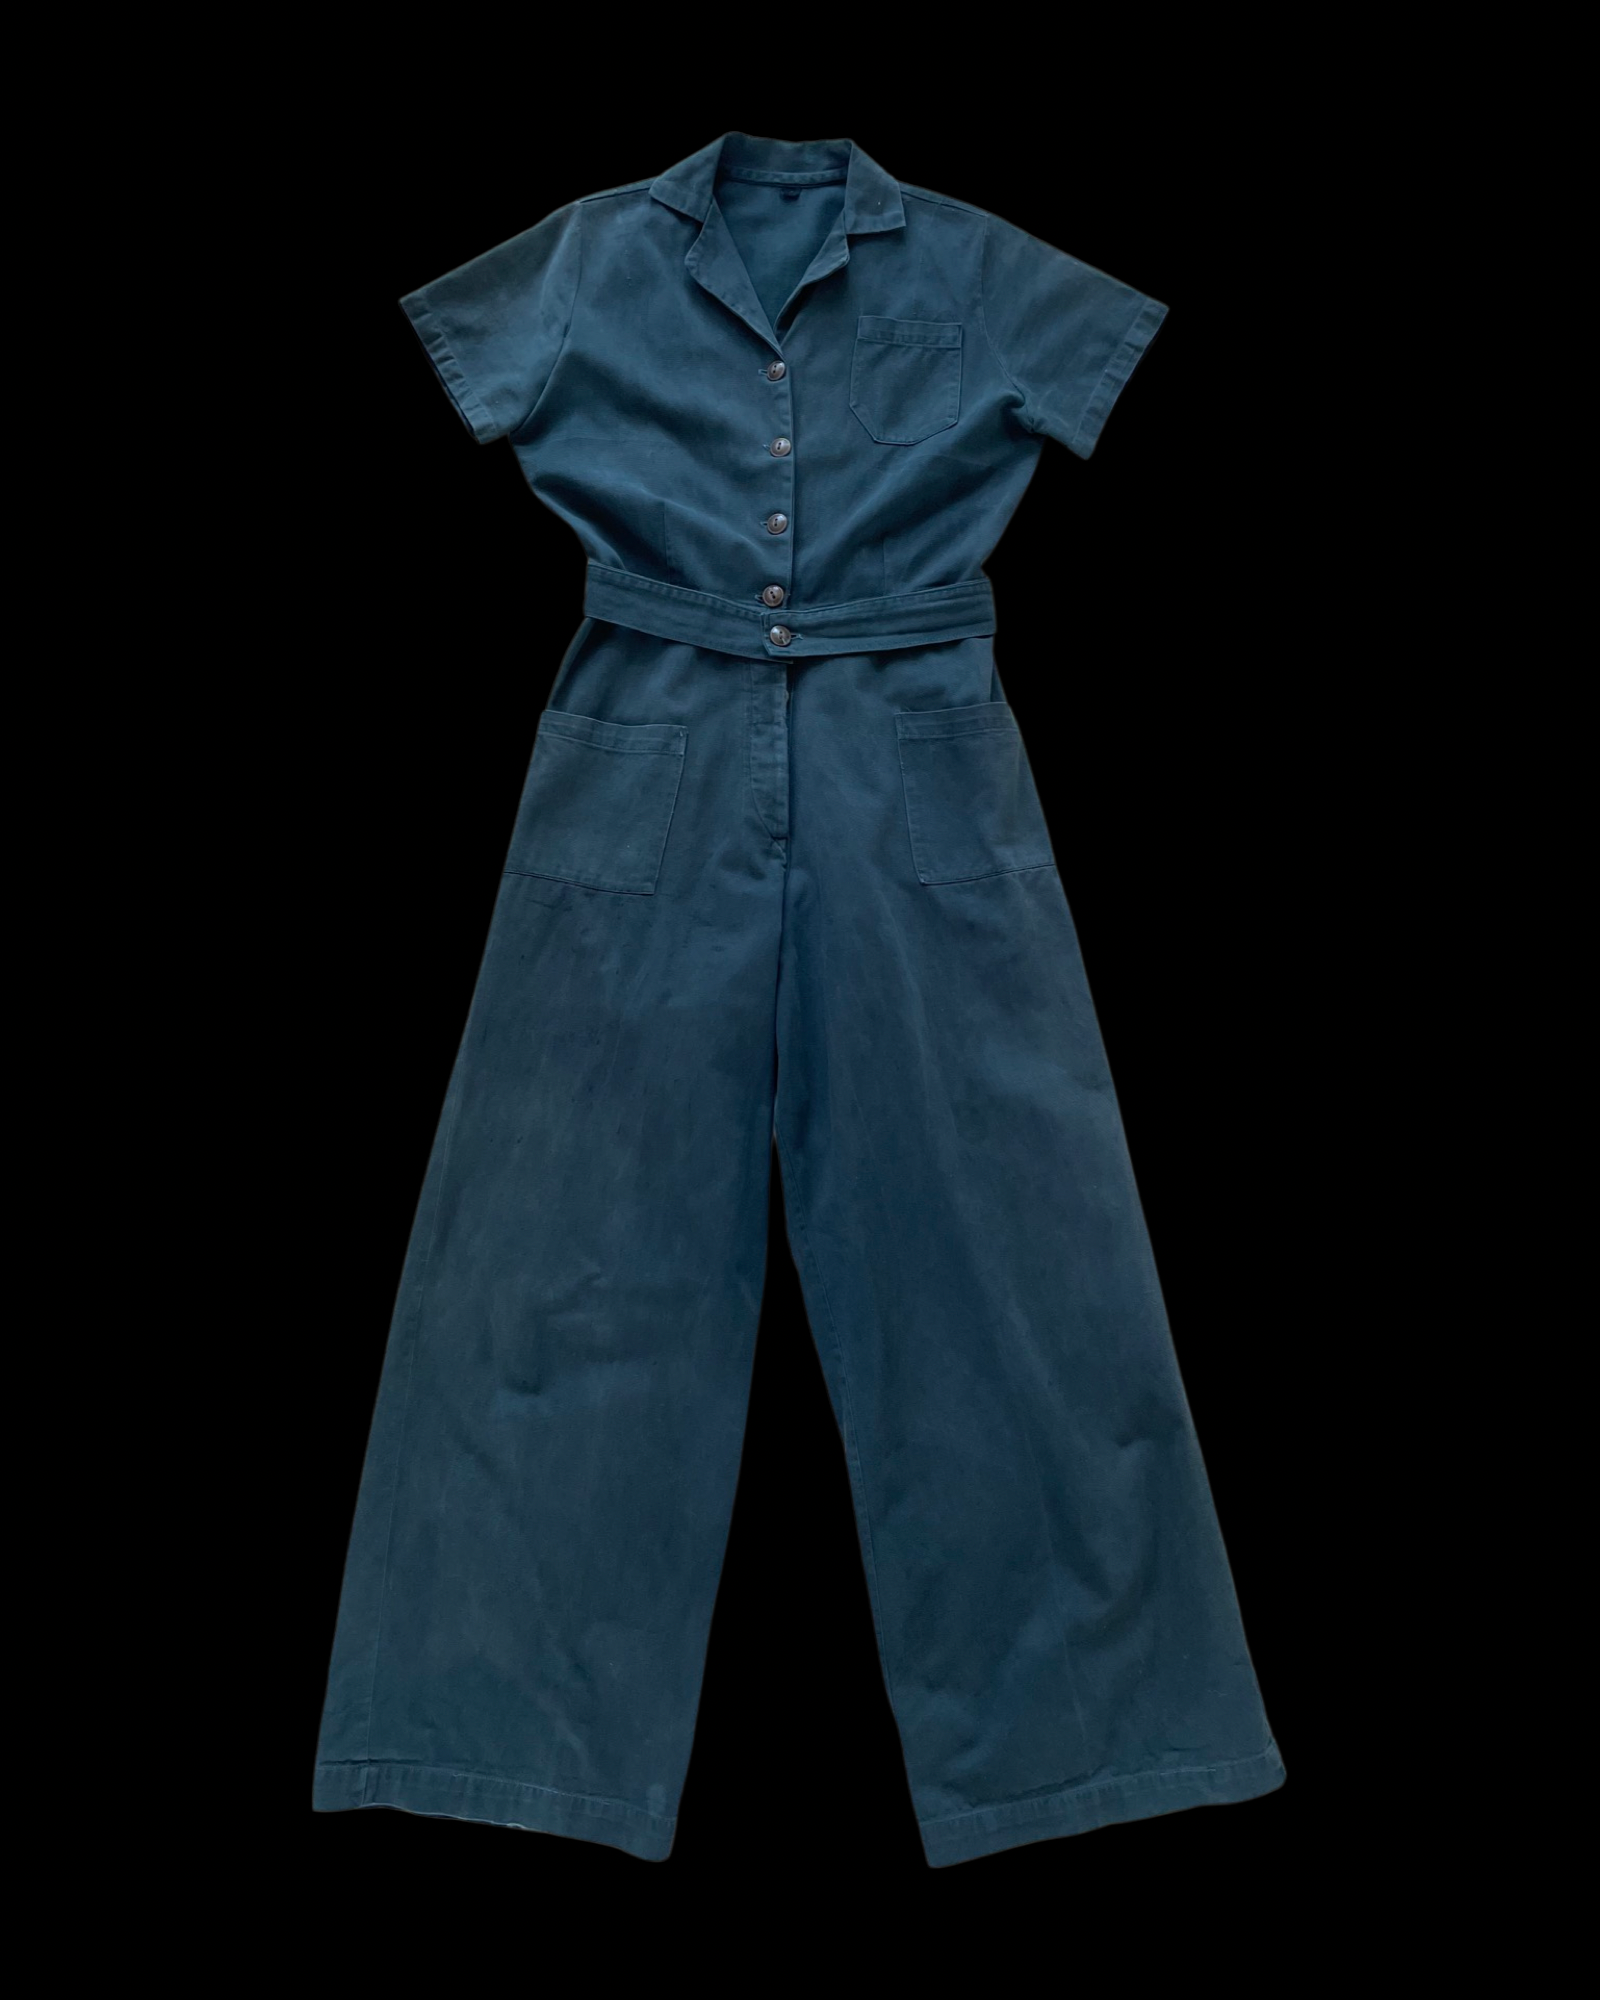 Rare WWII Era Ladies Workwear Belted Cotton Twill Coveralls